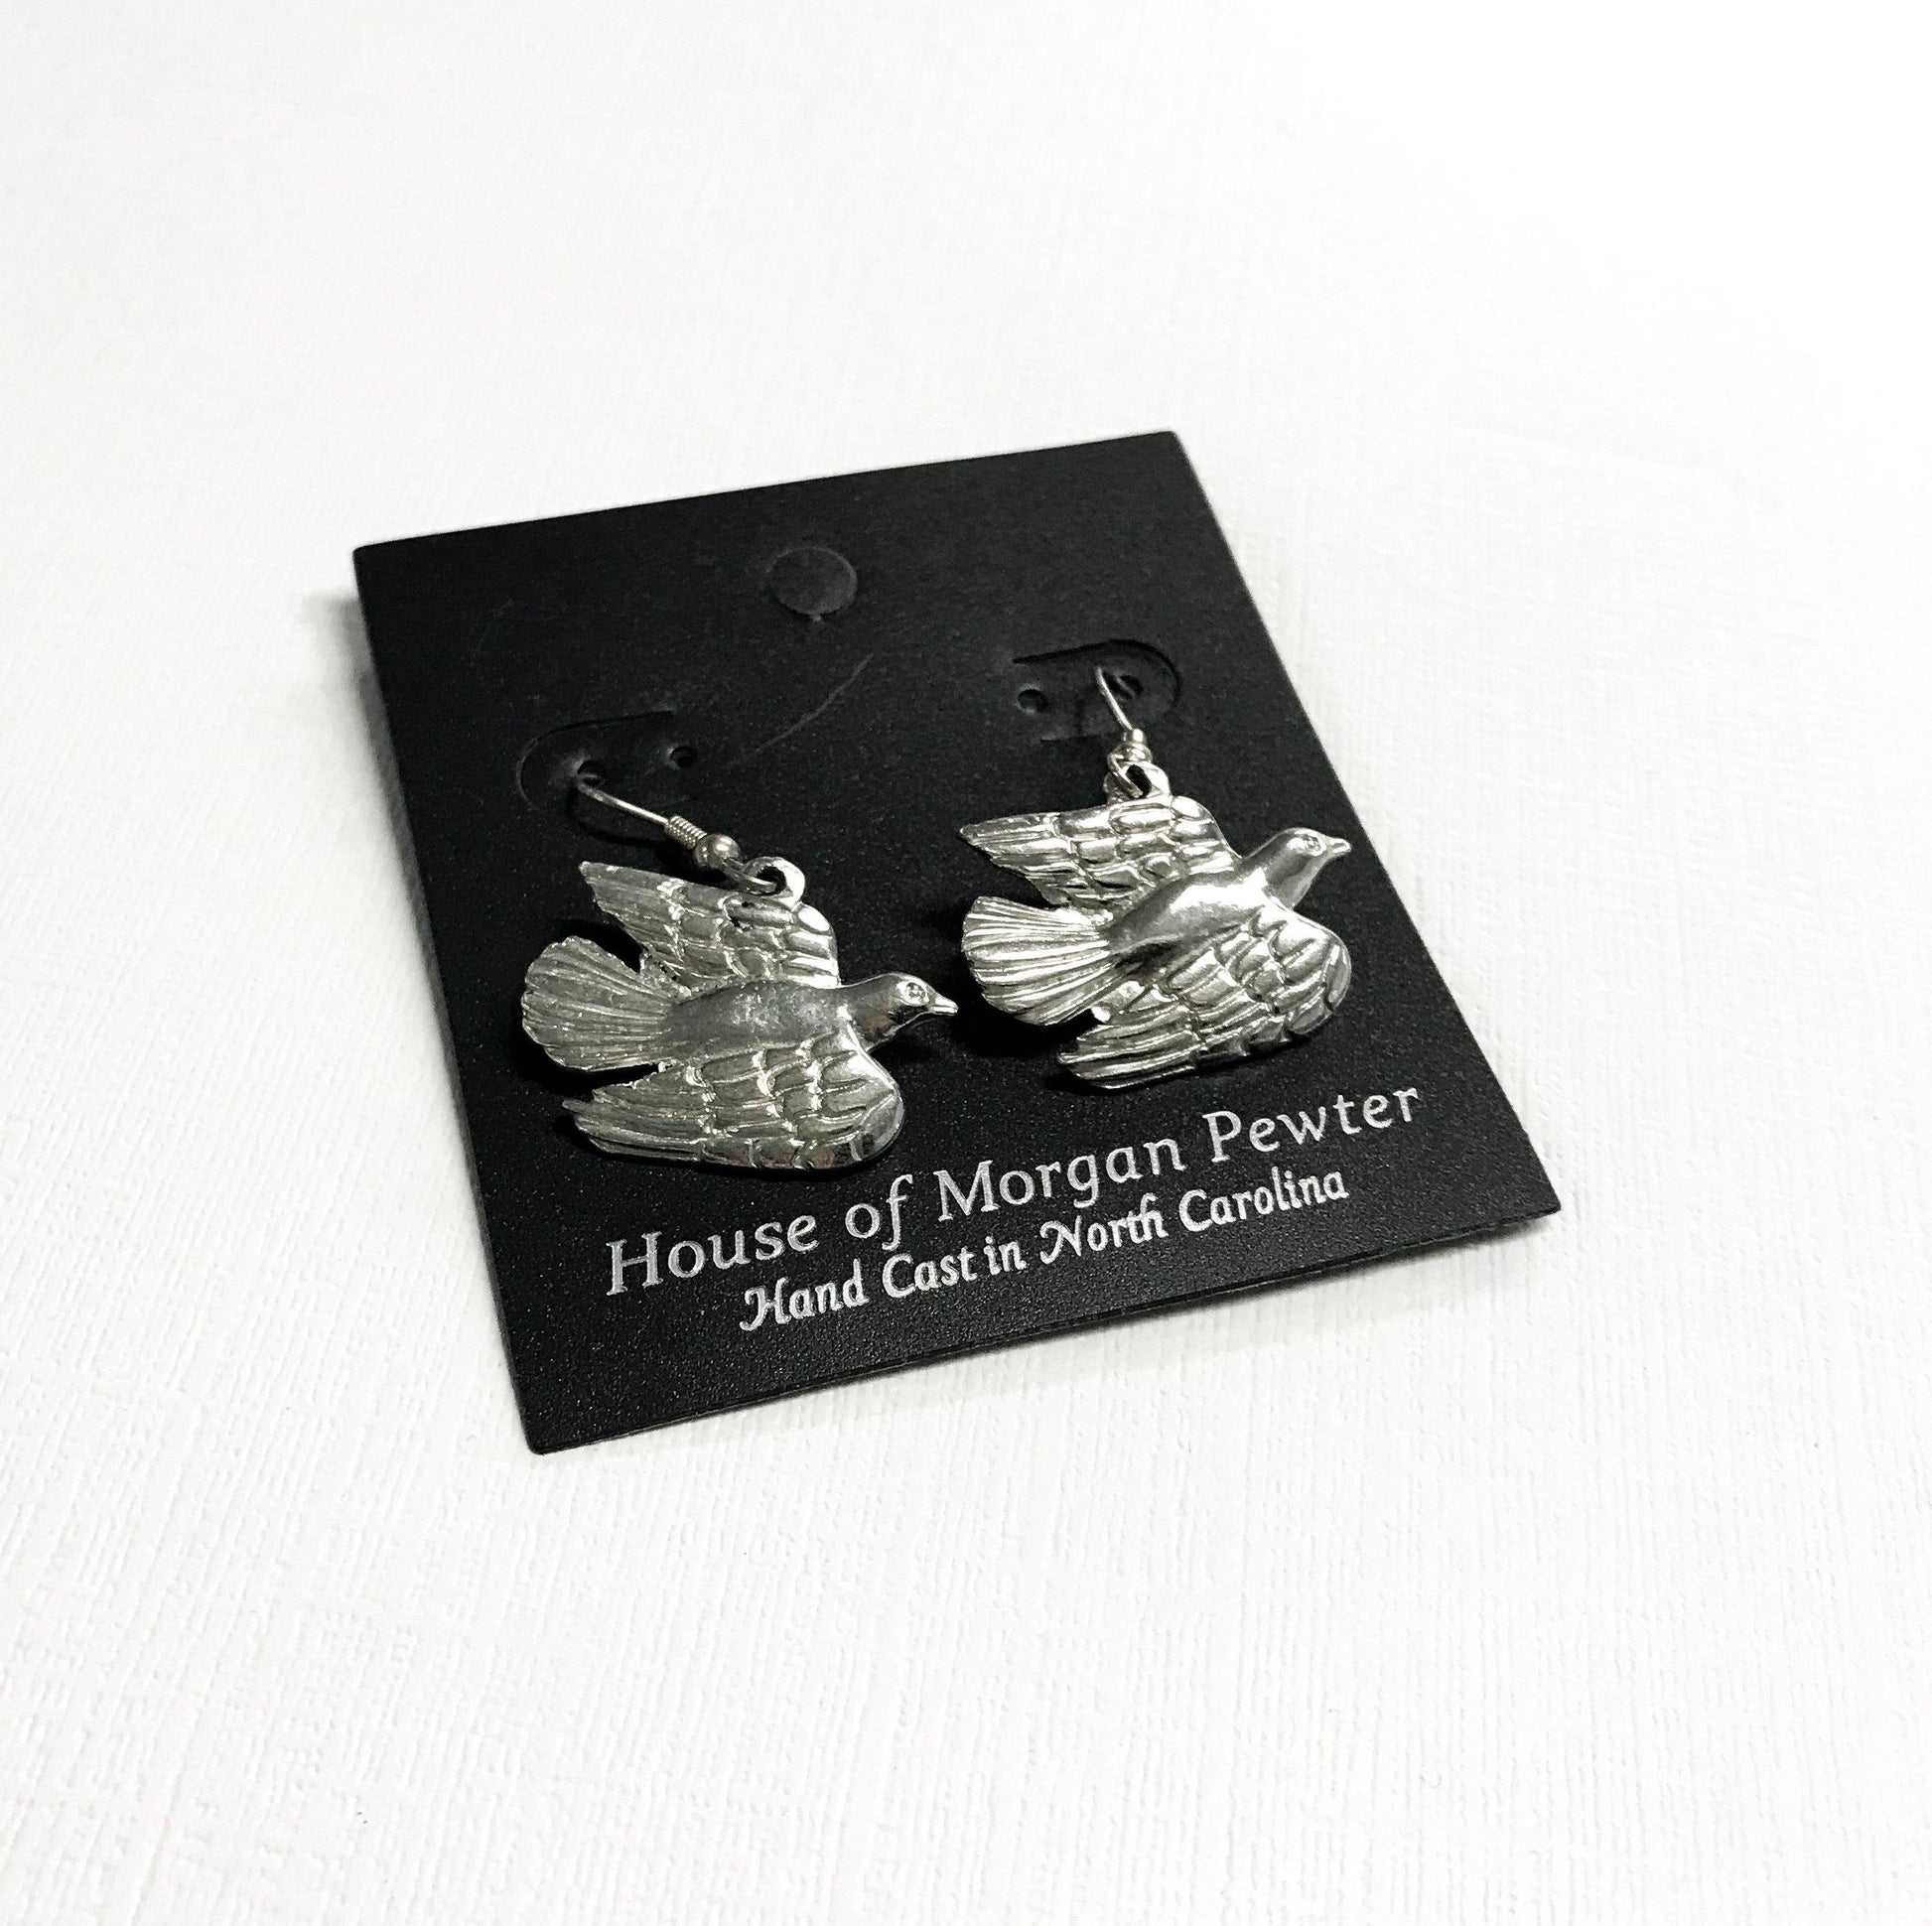 Handmade Pewter Dove Jewelry- Earrings, Necklace, Gift Set - House of Morgan Pewter